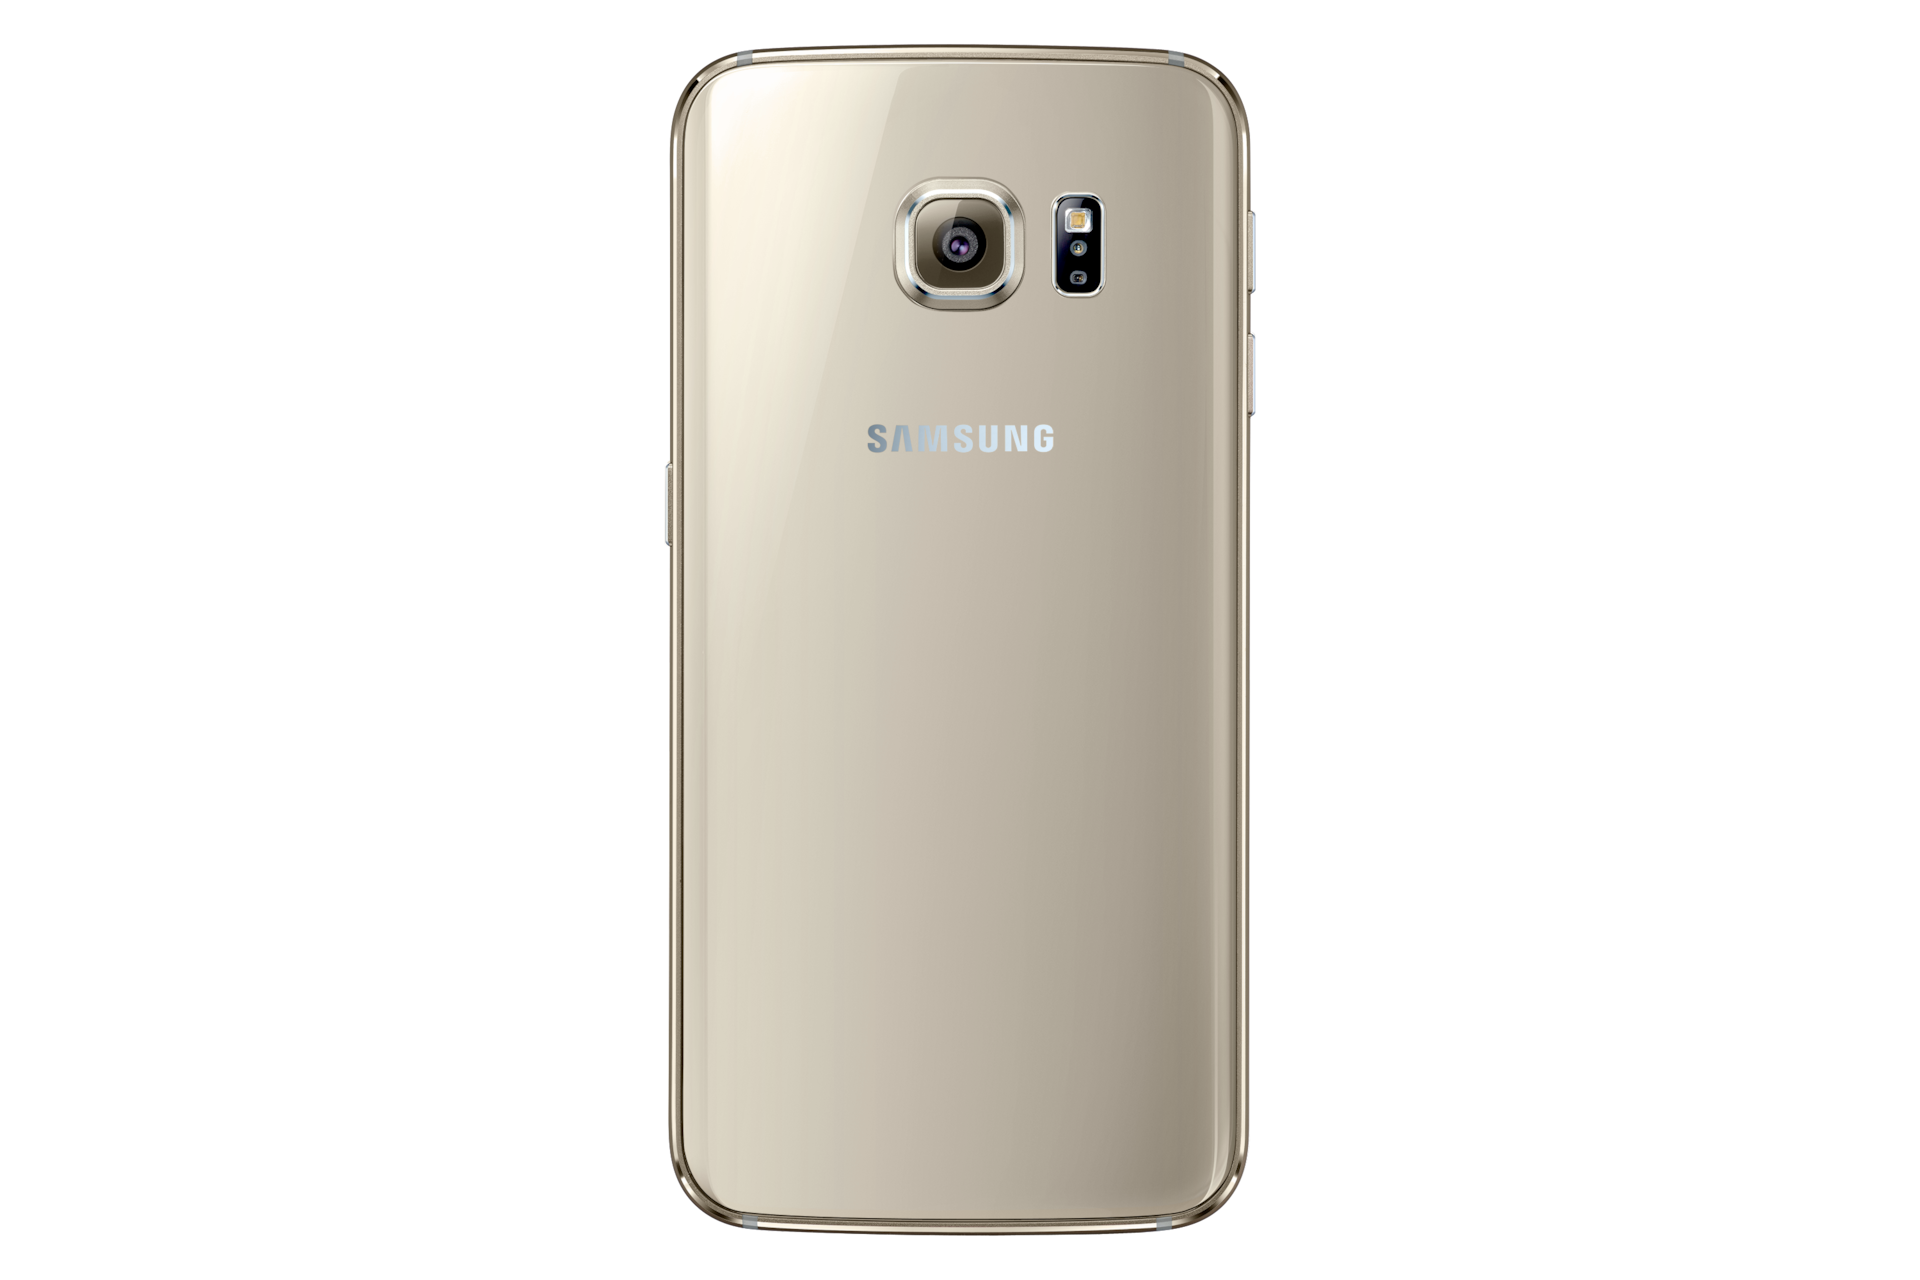 Samsung Galaxy S6 edge Price, New Galaxy S6 edge Features, Specifications, Reviews3000 x 2000